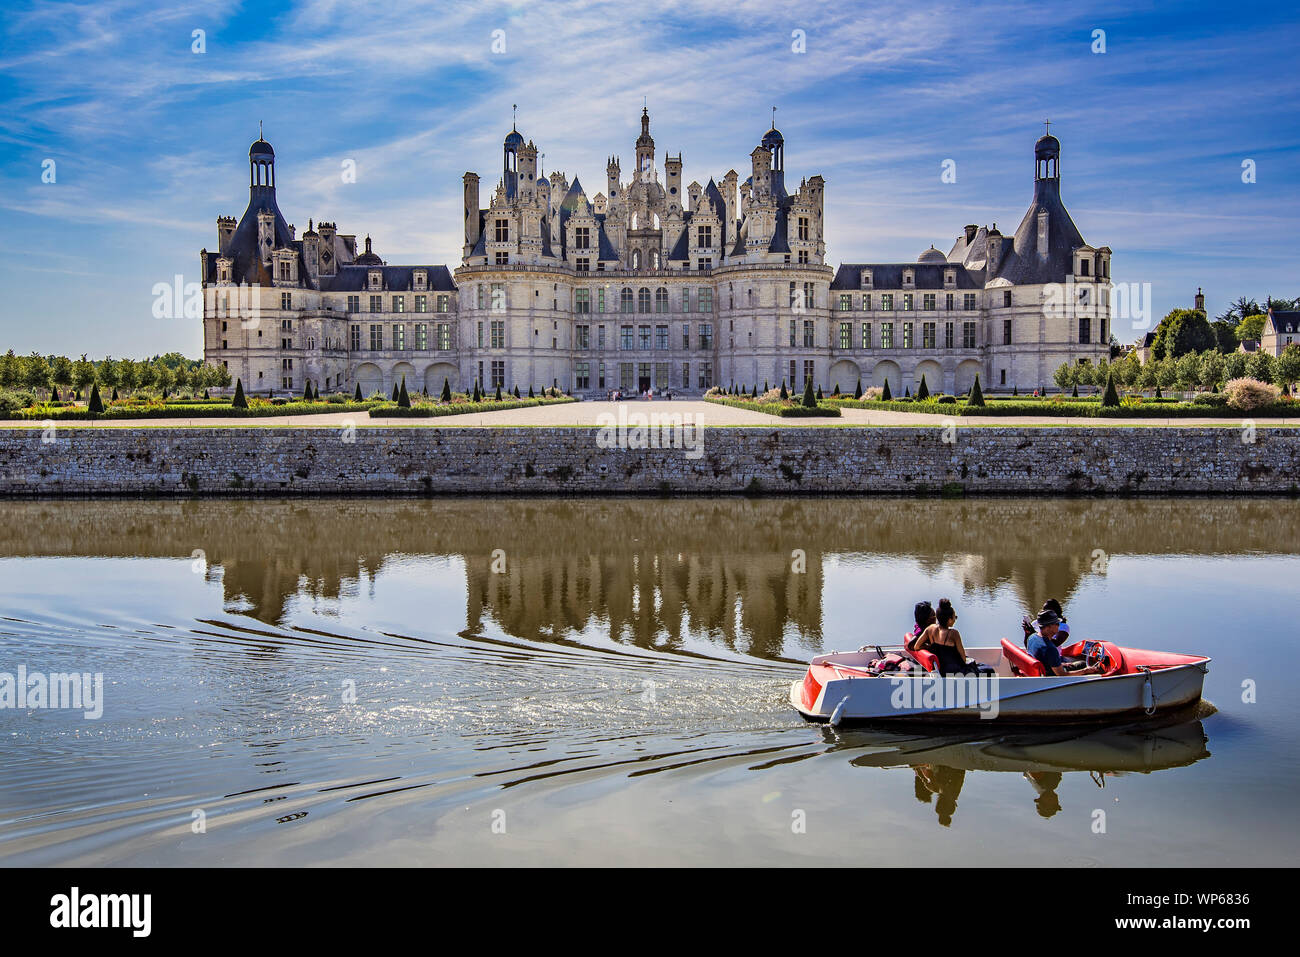 Chambord Castle with some people boating on the canal that surrounds it Stock Photo